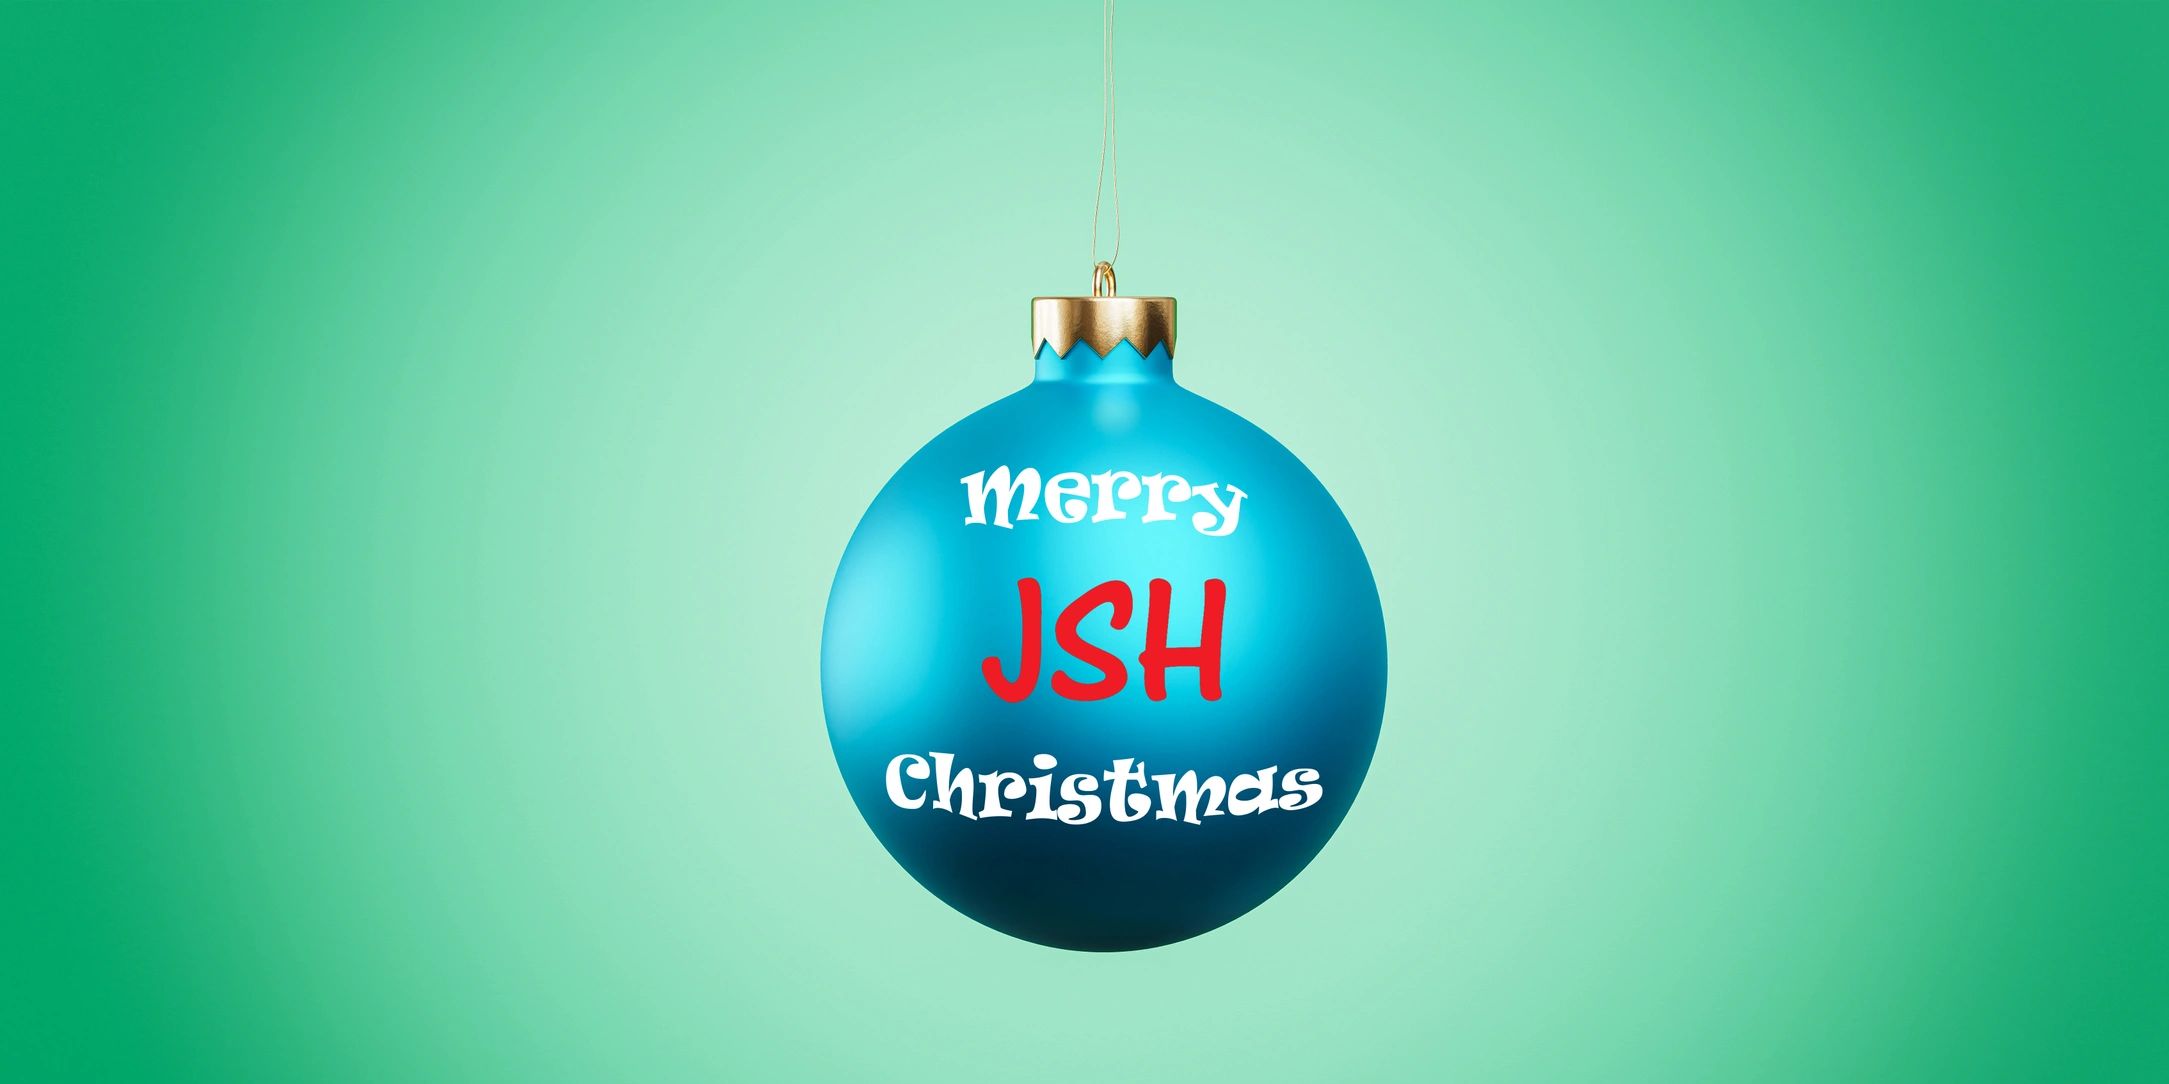 Merry Christmas on a turquoise bauble featuring the Johns Slater and Haward red logo